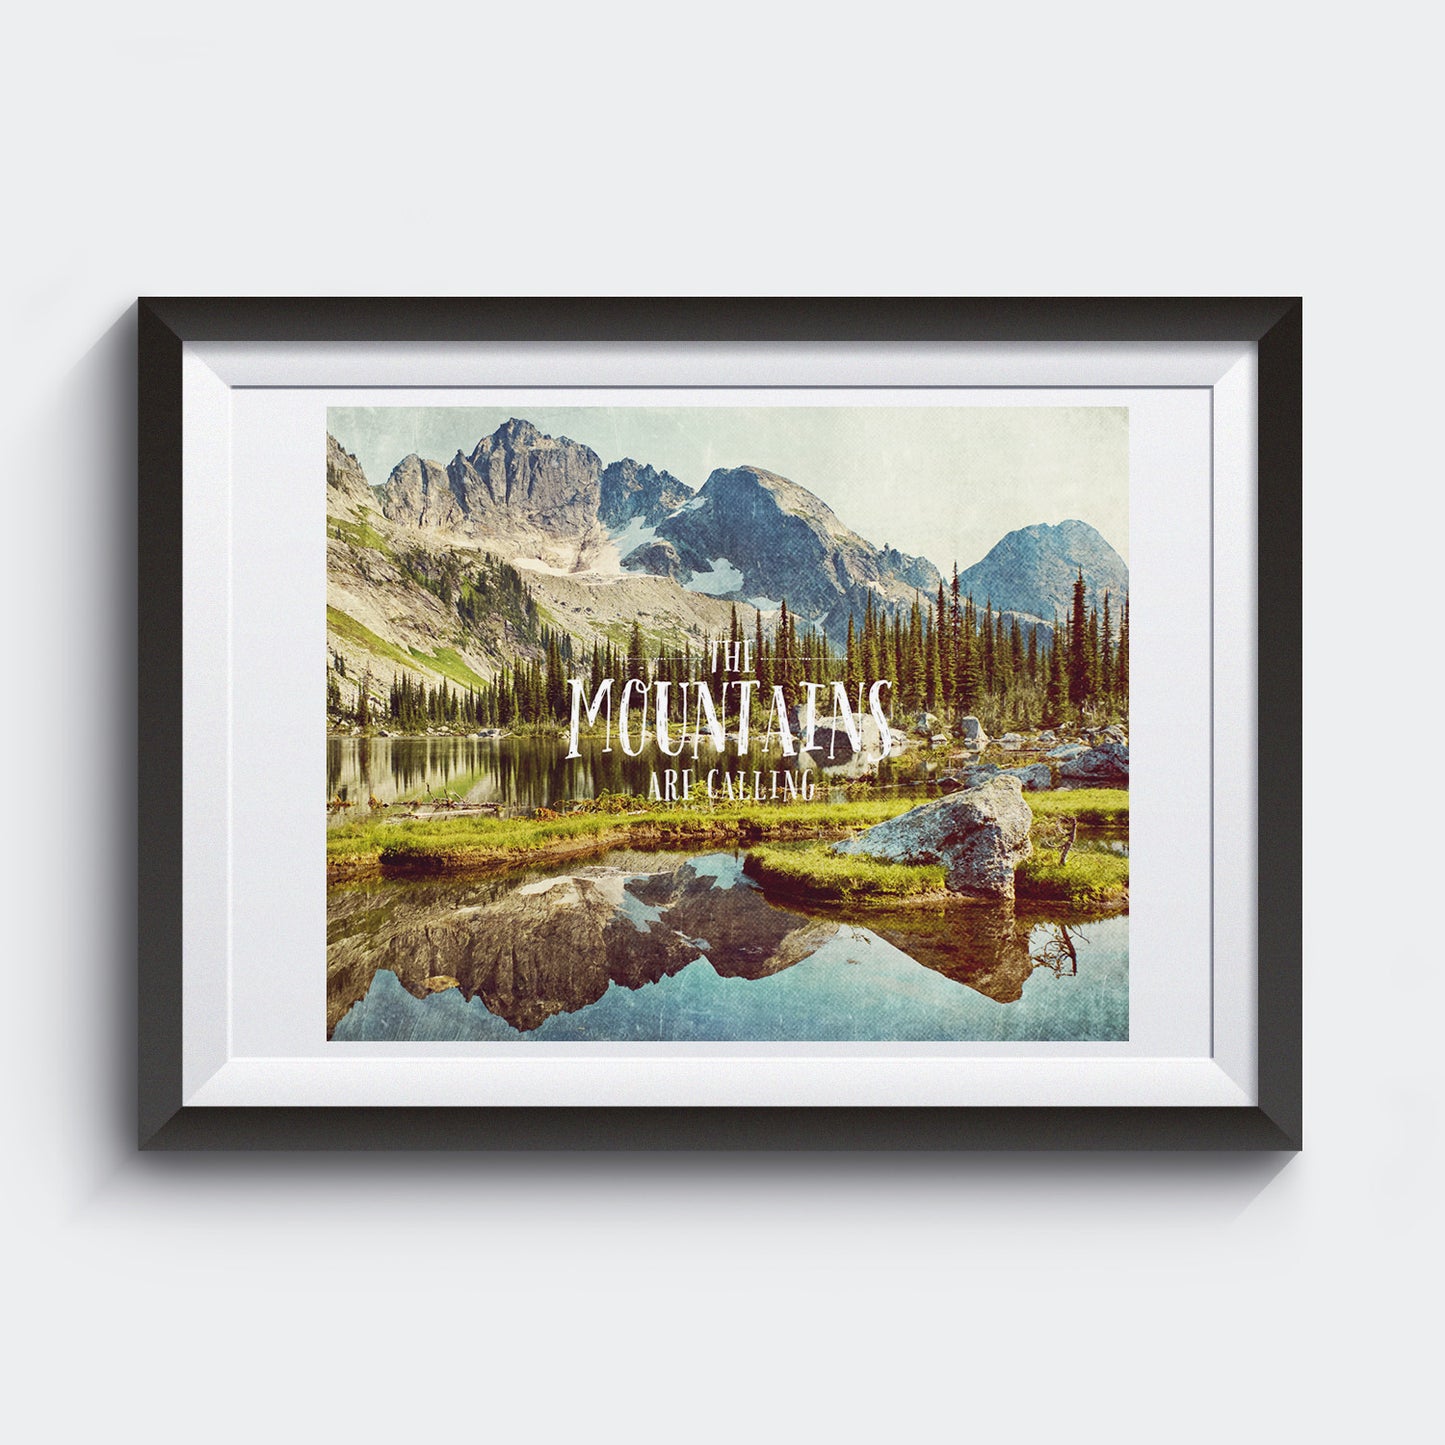 The Mountains Are Calling <br>Valhalla Provincial Park B.C <br> Limited Release Archival Fine Art Print